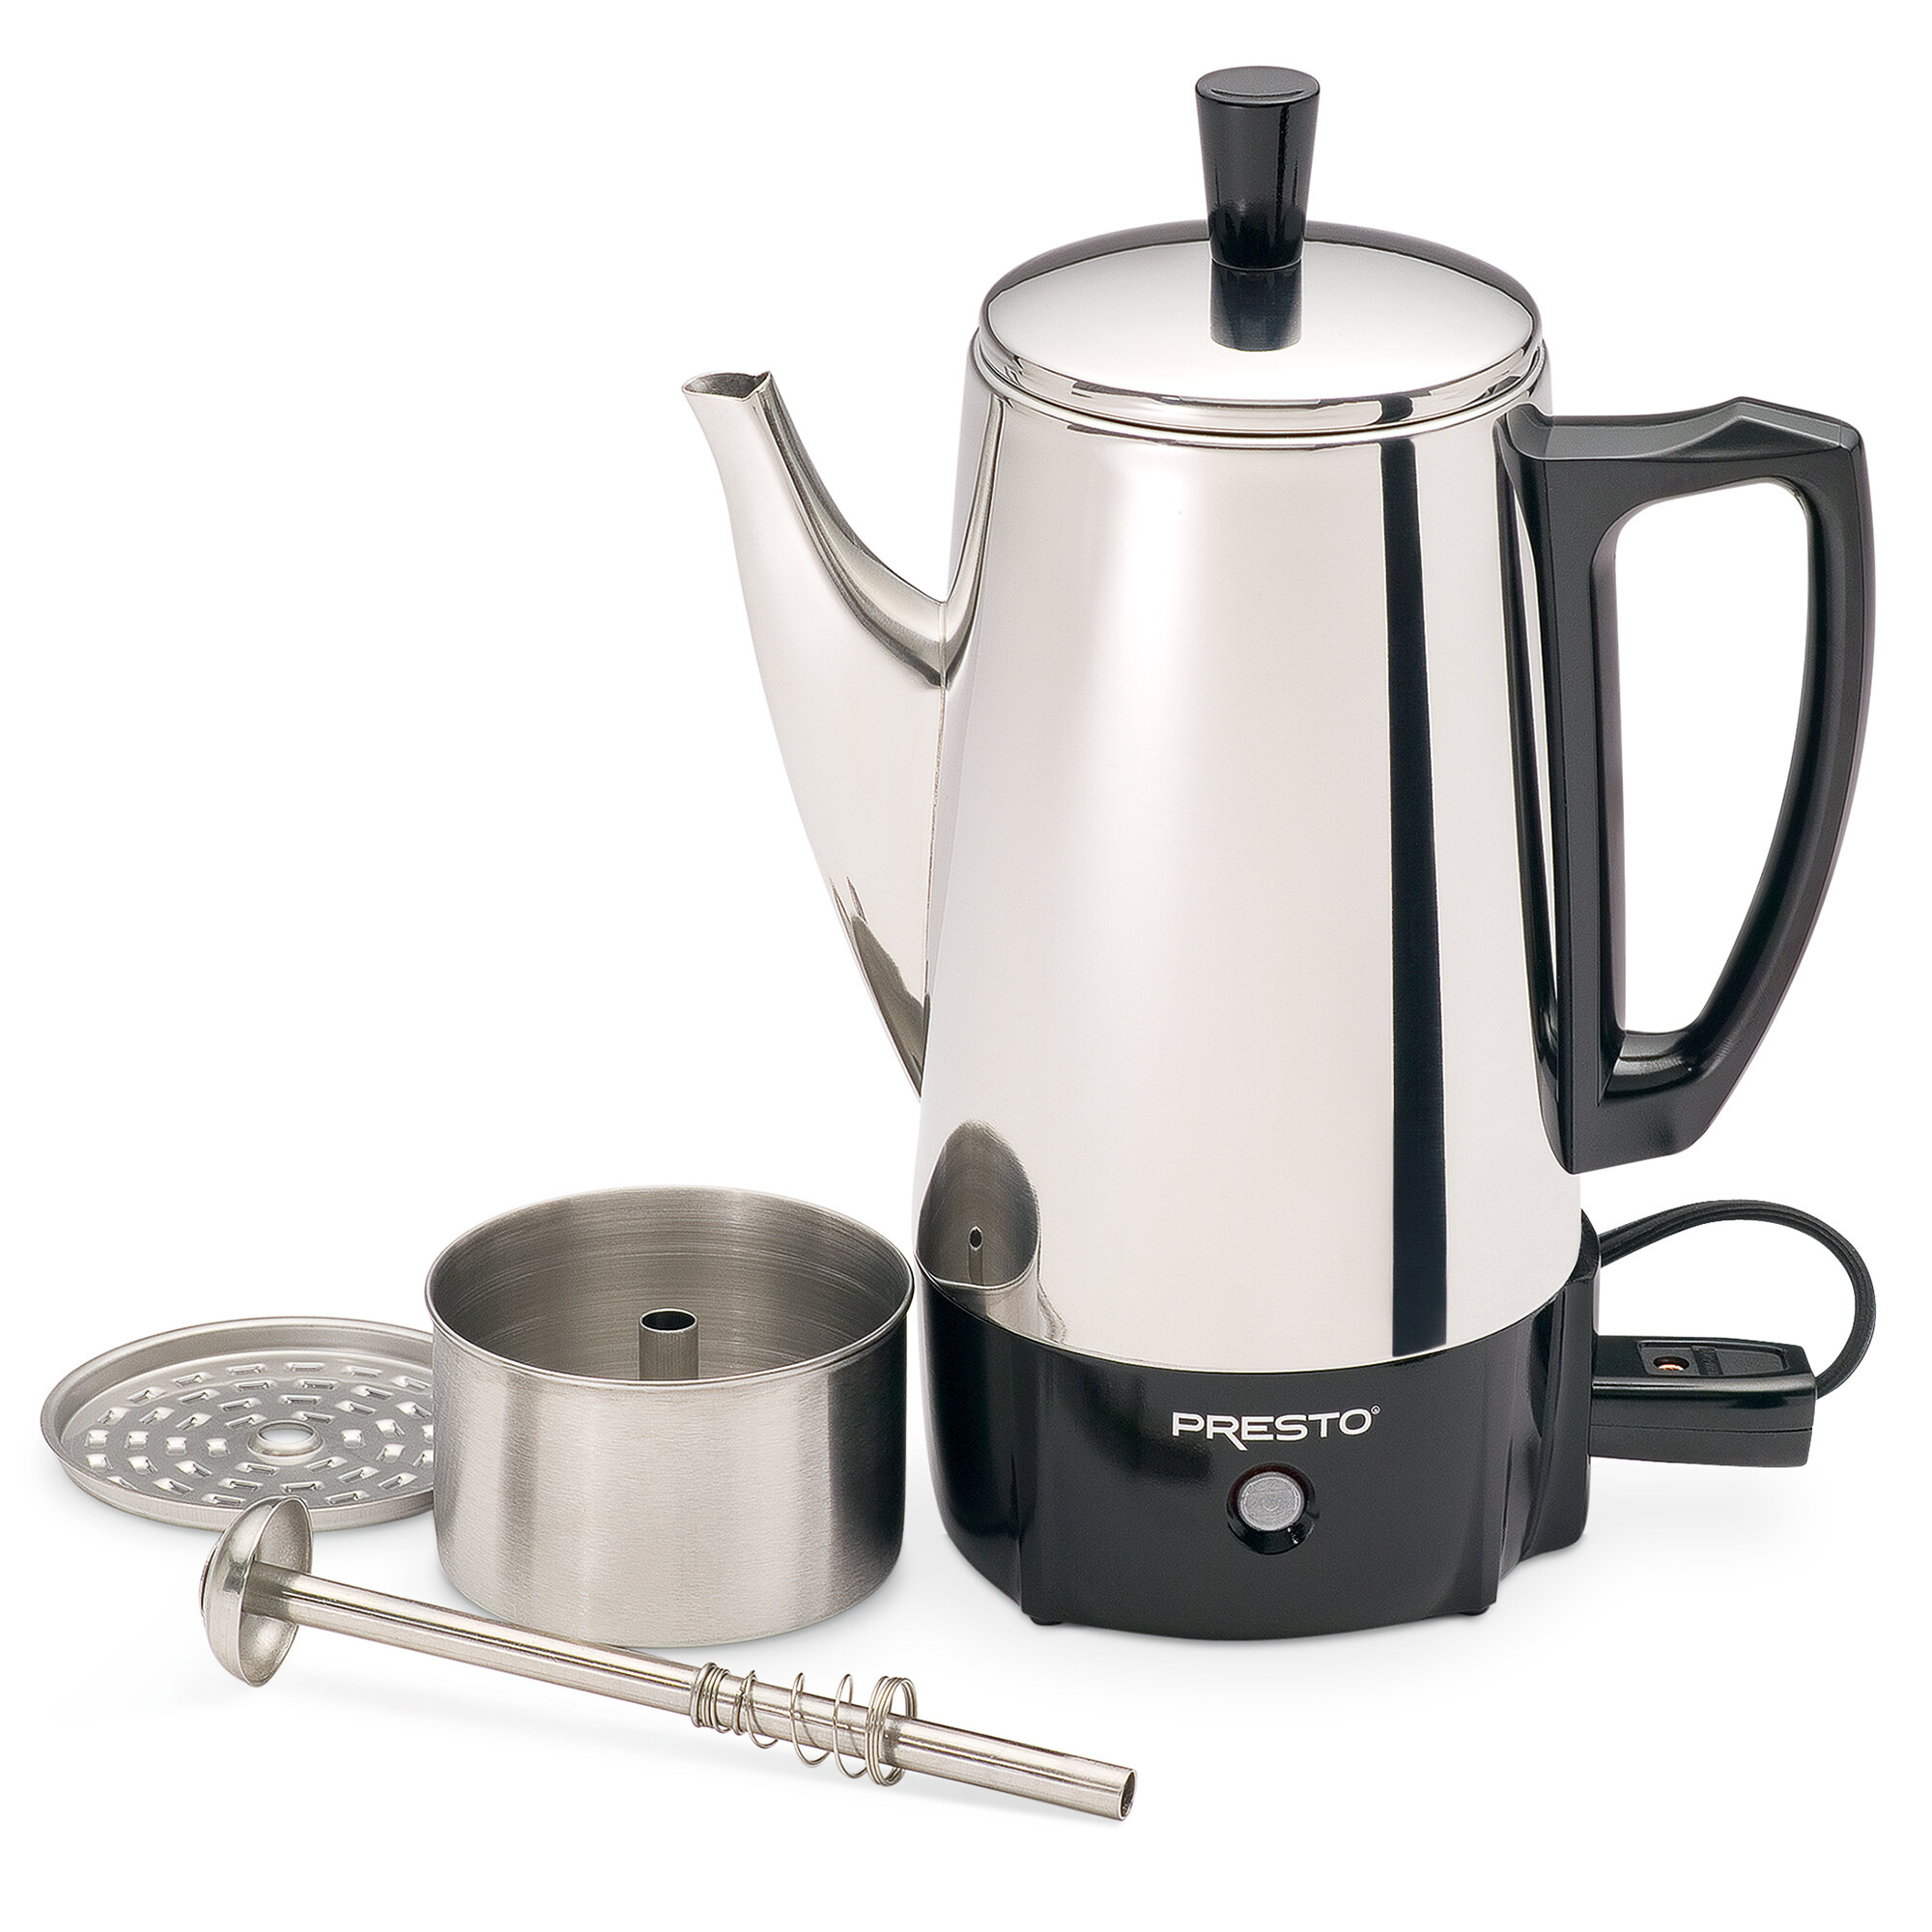 Stansport Stainless Steel Percolator 9-Cup Coffee Pot